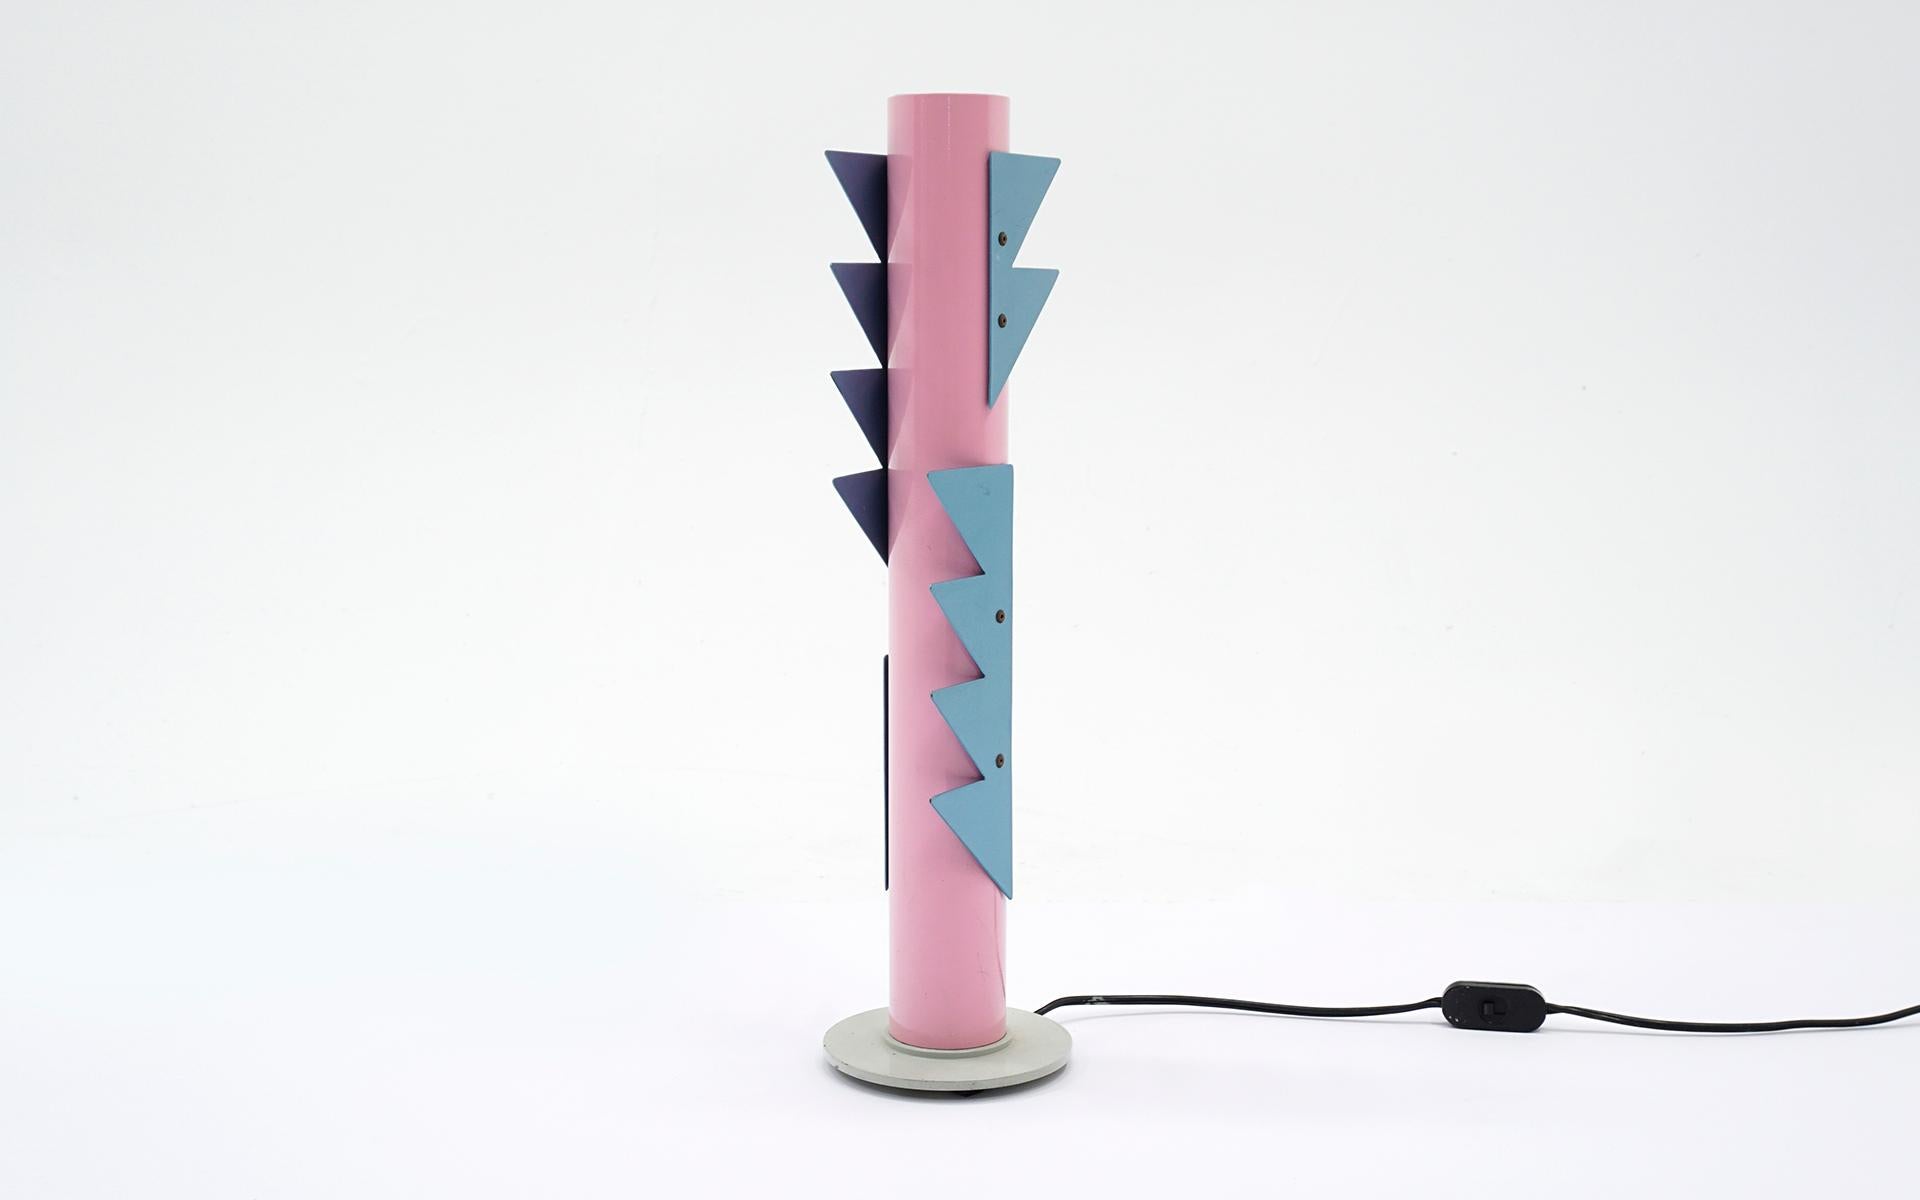 Rare Postmodern table lamp designed by Alessandro Mendini for Studio Alchimia / Gruppo Alchimia. Very good condition with few if any signs of wear. Pink and blue lacquered aluminum with the light source at the top. European wiring. Can be used in